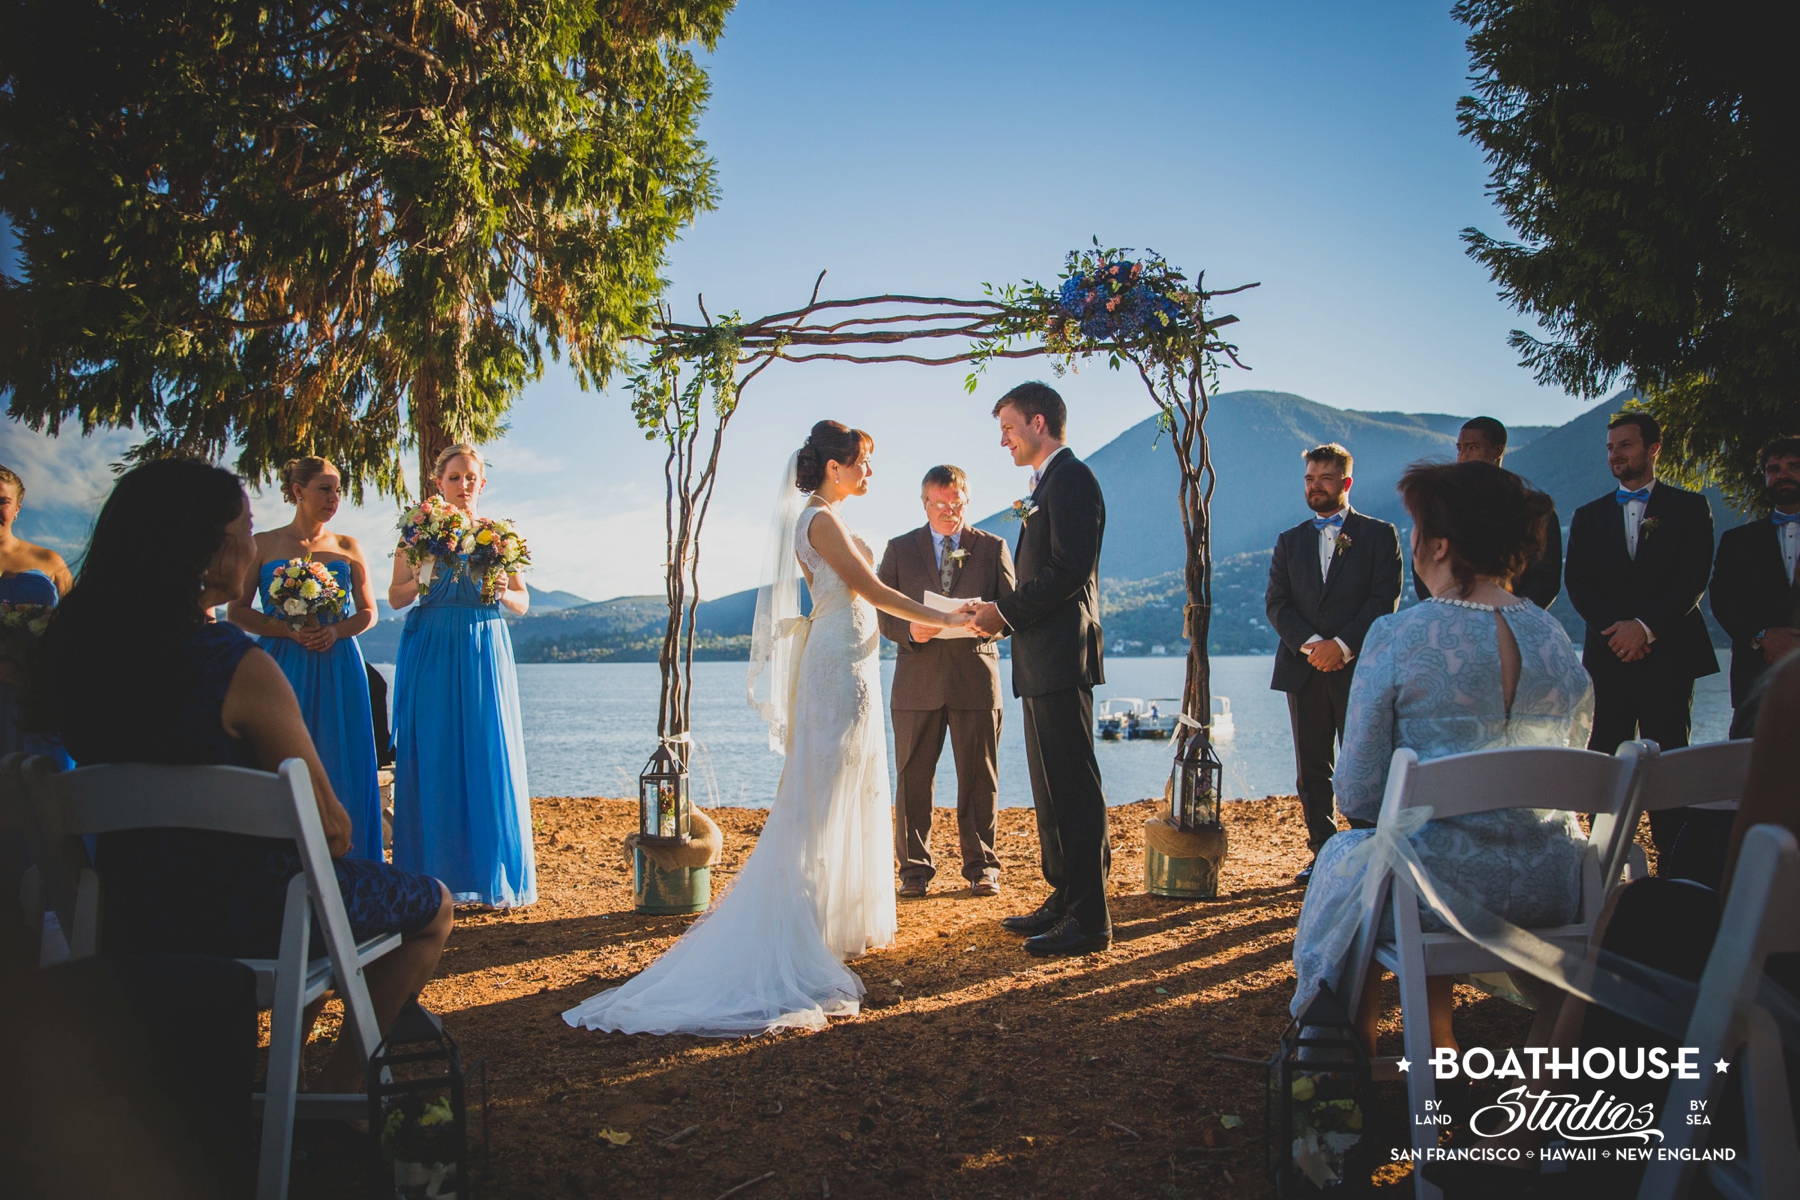 An incredible lakefront wedding. World class views with a mountain ridge in the background. Fantastic space for a wedding!